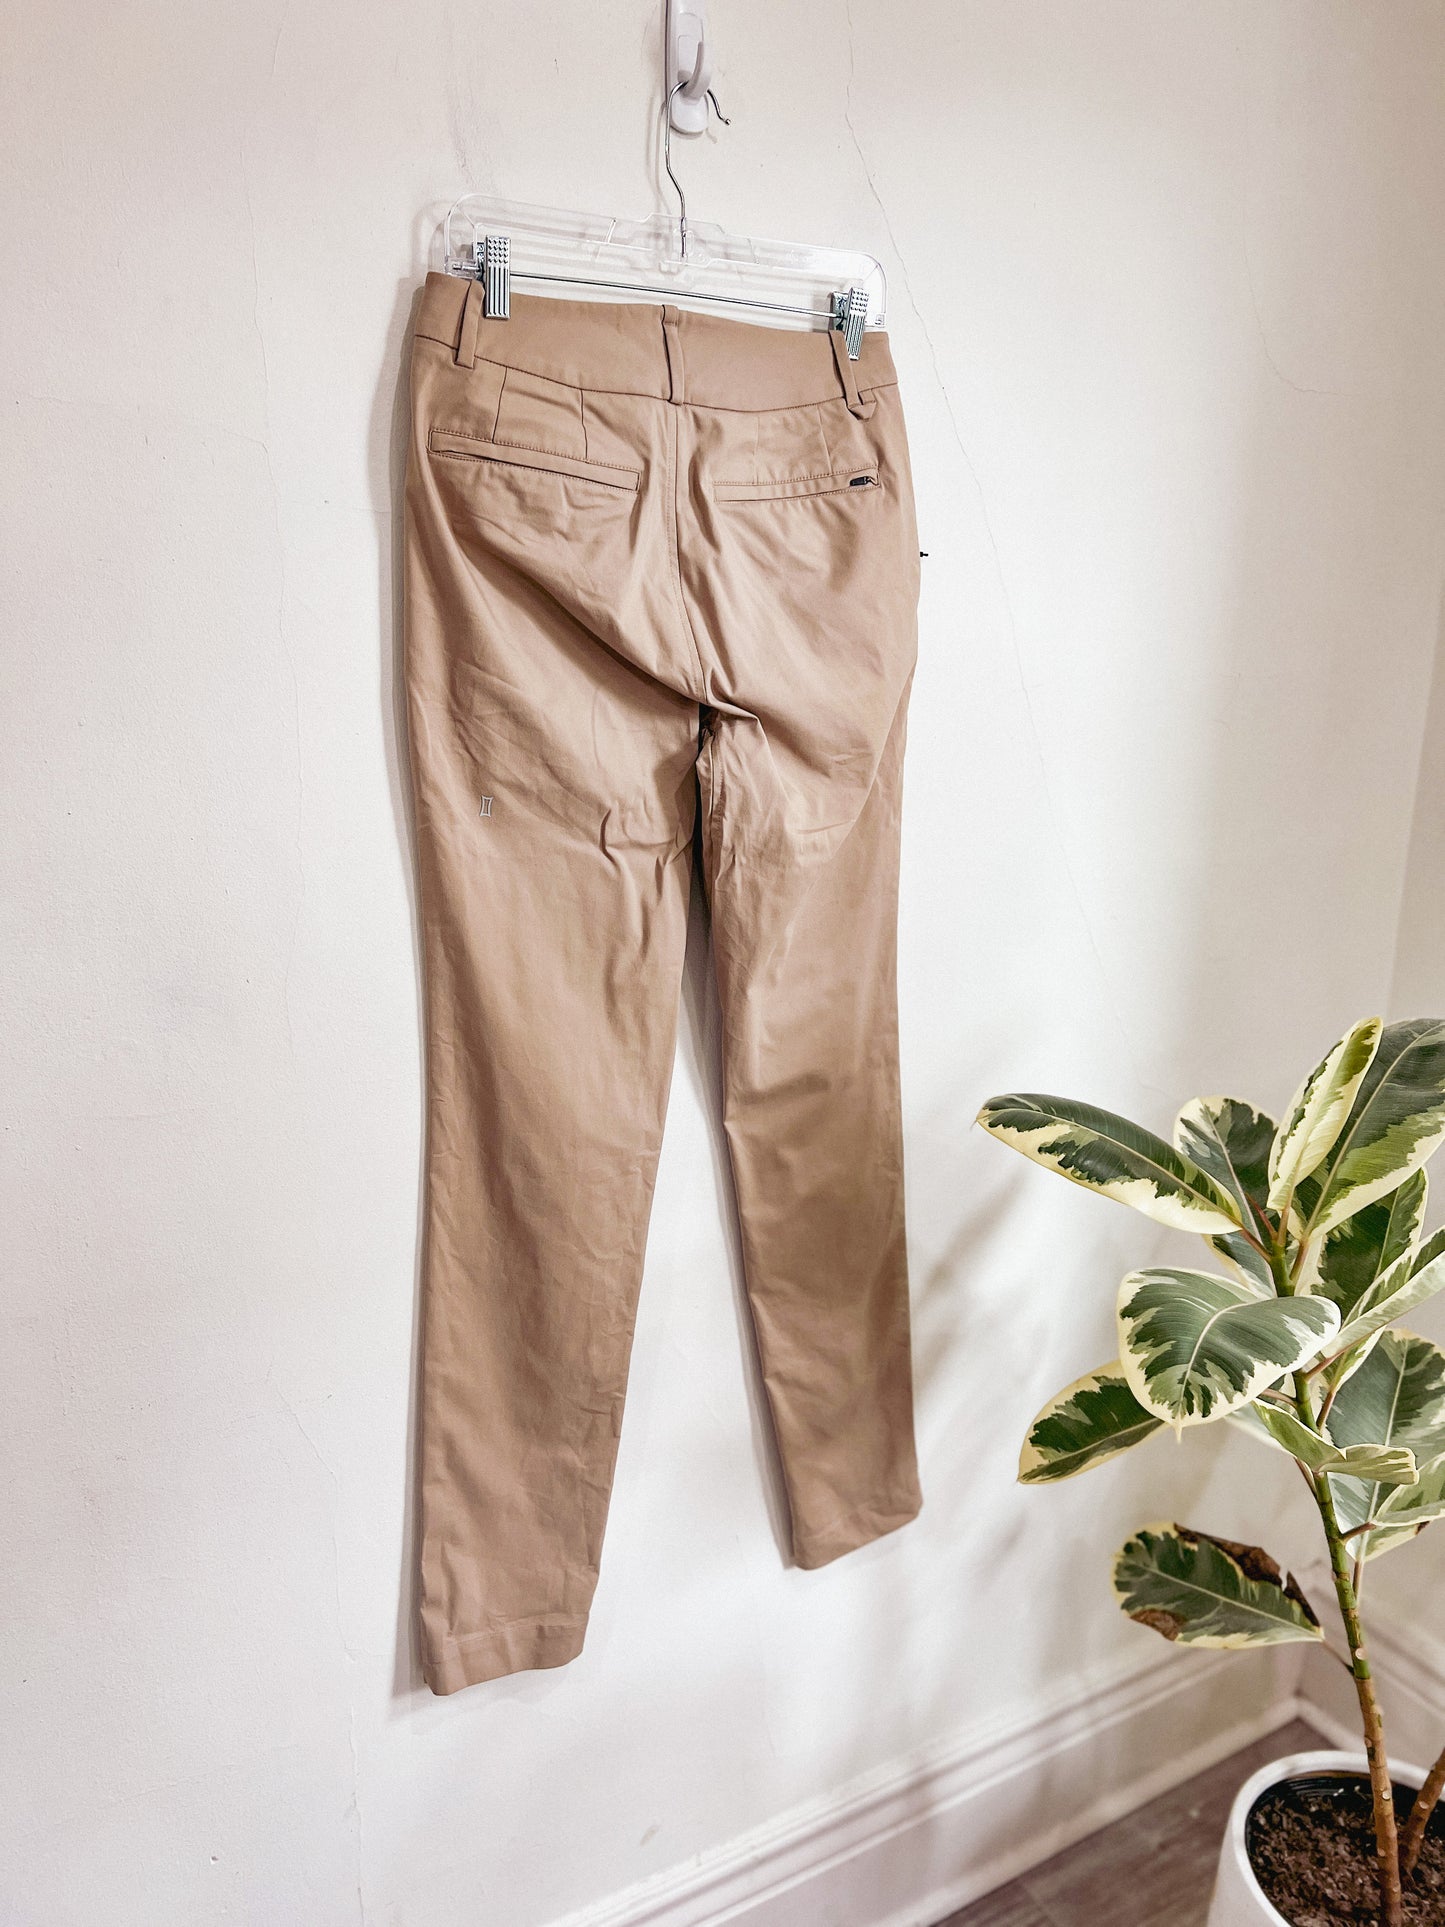 Kit & Ace Brown Navigator Trousers (Size 30)